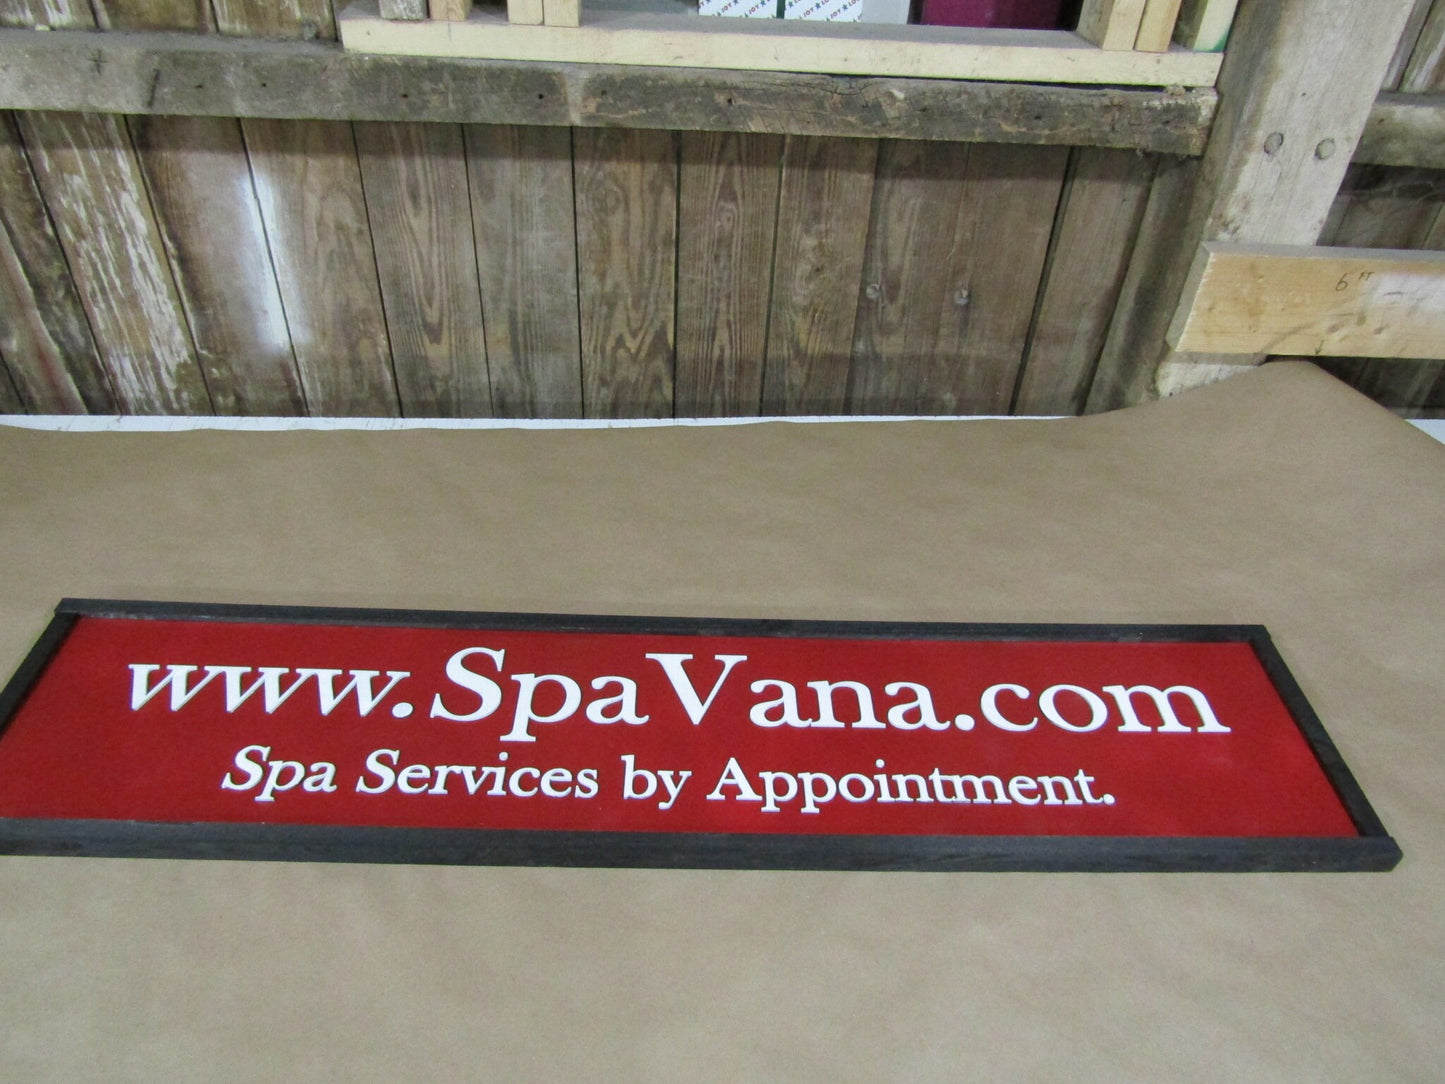 Oversized Custom Sign Spa Beauty Salon Your Logo Image Emblem Name Here Personalized Painted Red 3D Raised Text Indoor Outdoor Store Front